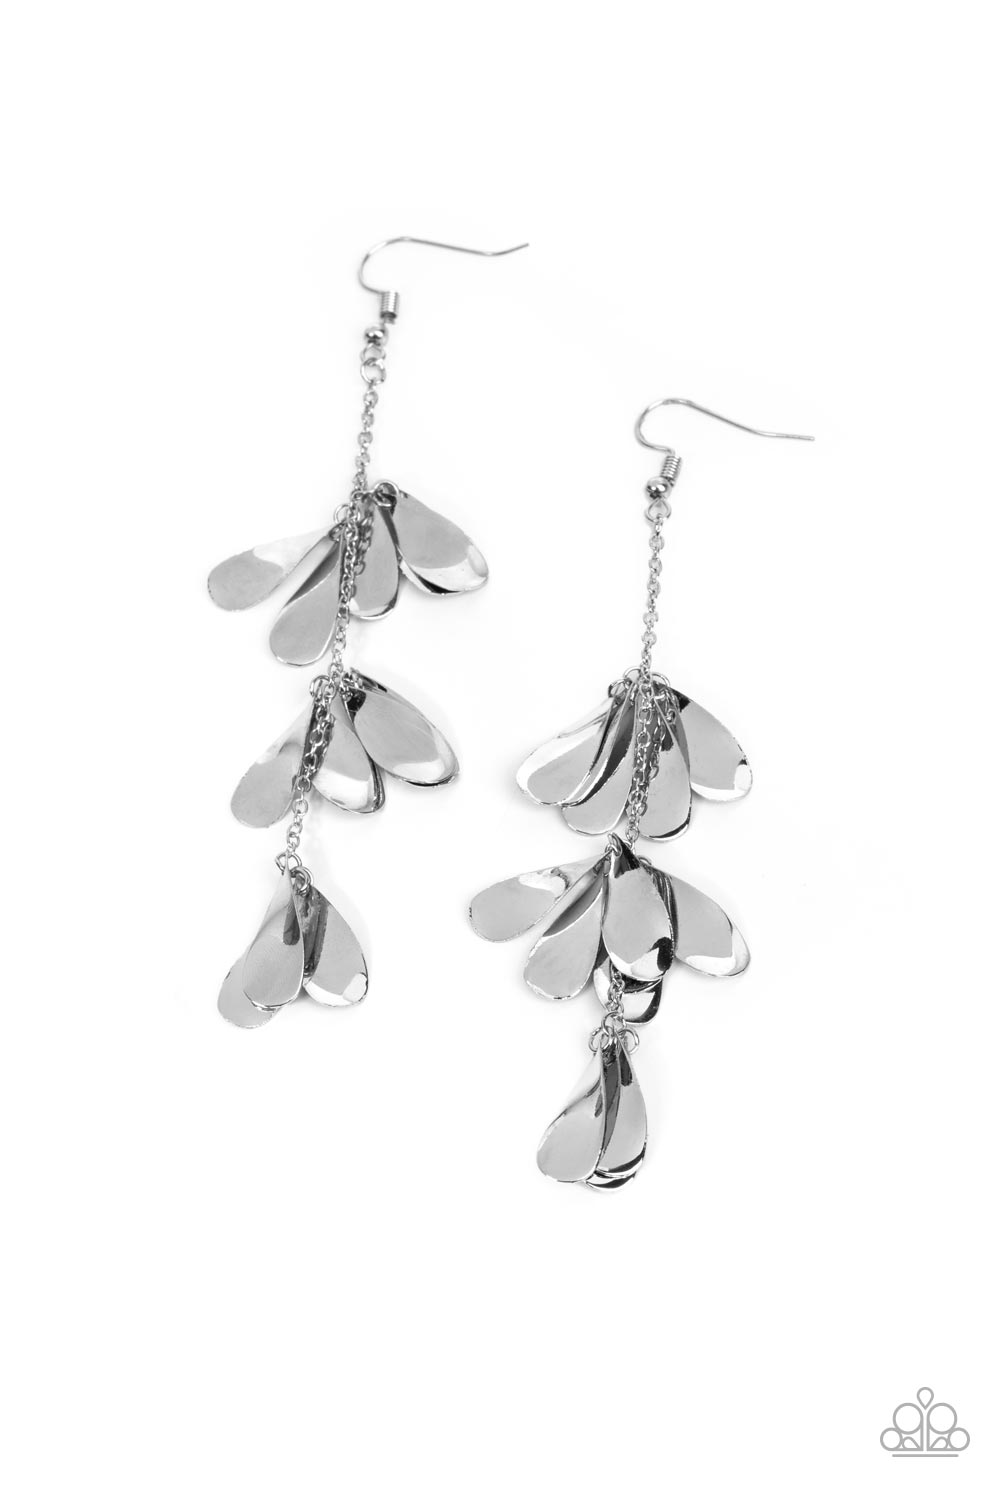 Arrival CHIME - Silver Teardrop Earrings - Paparazzi Accessories - Clusters of shiny silver teardrop discs dangle and spin along a dainty silver chain, creating a shimmery tinkling lure. Earring attaches to a standard fishhook fitting.